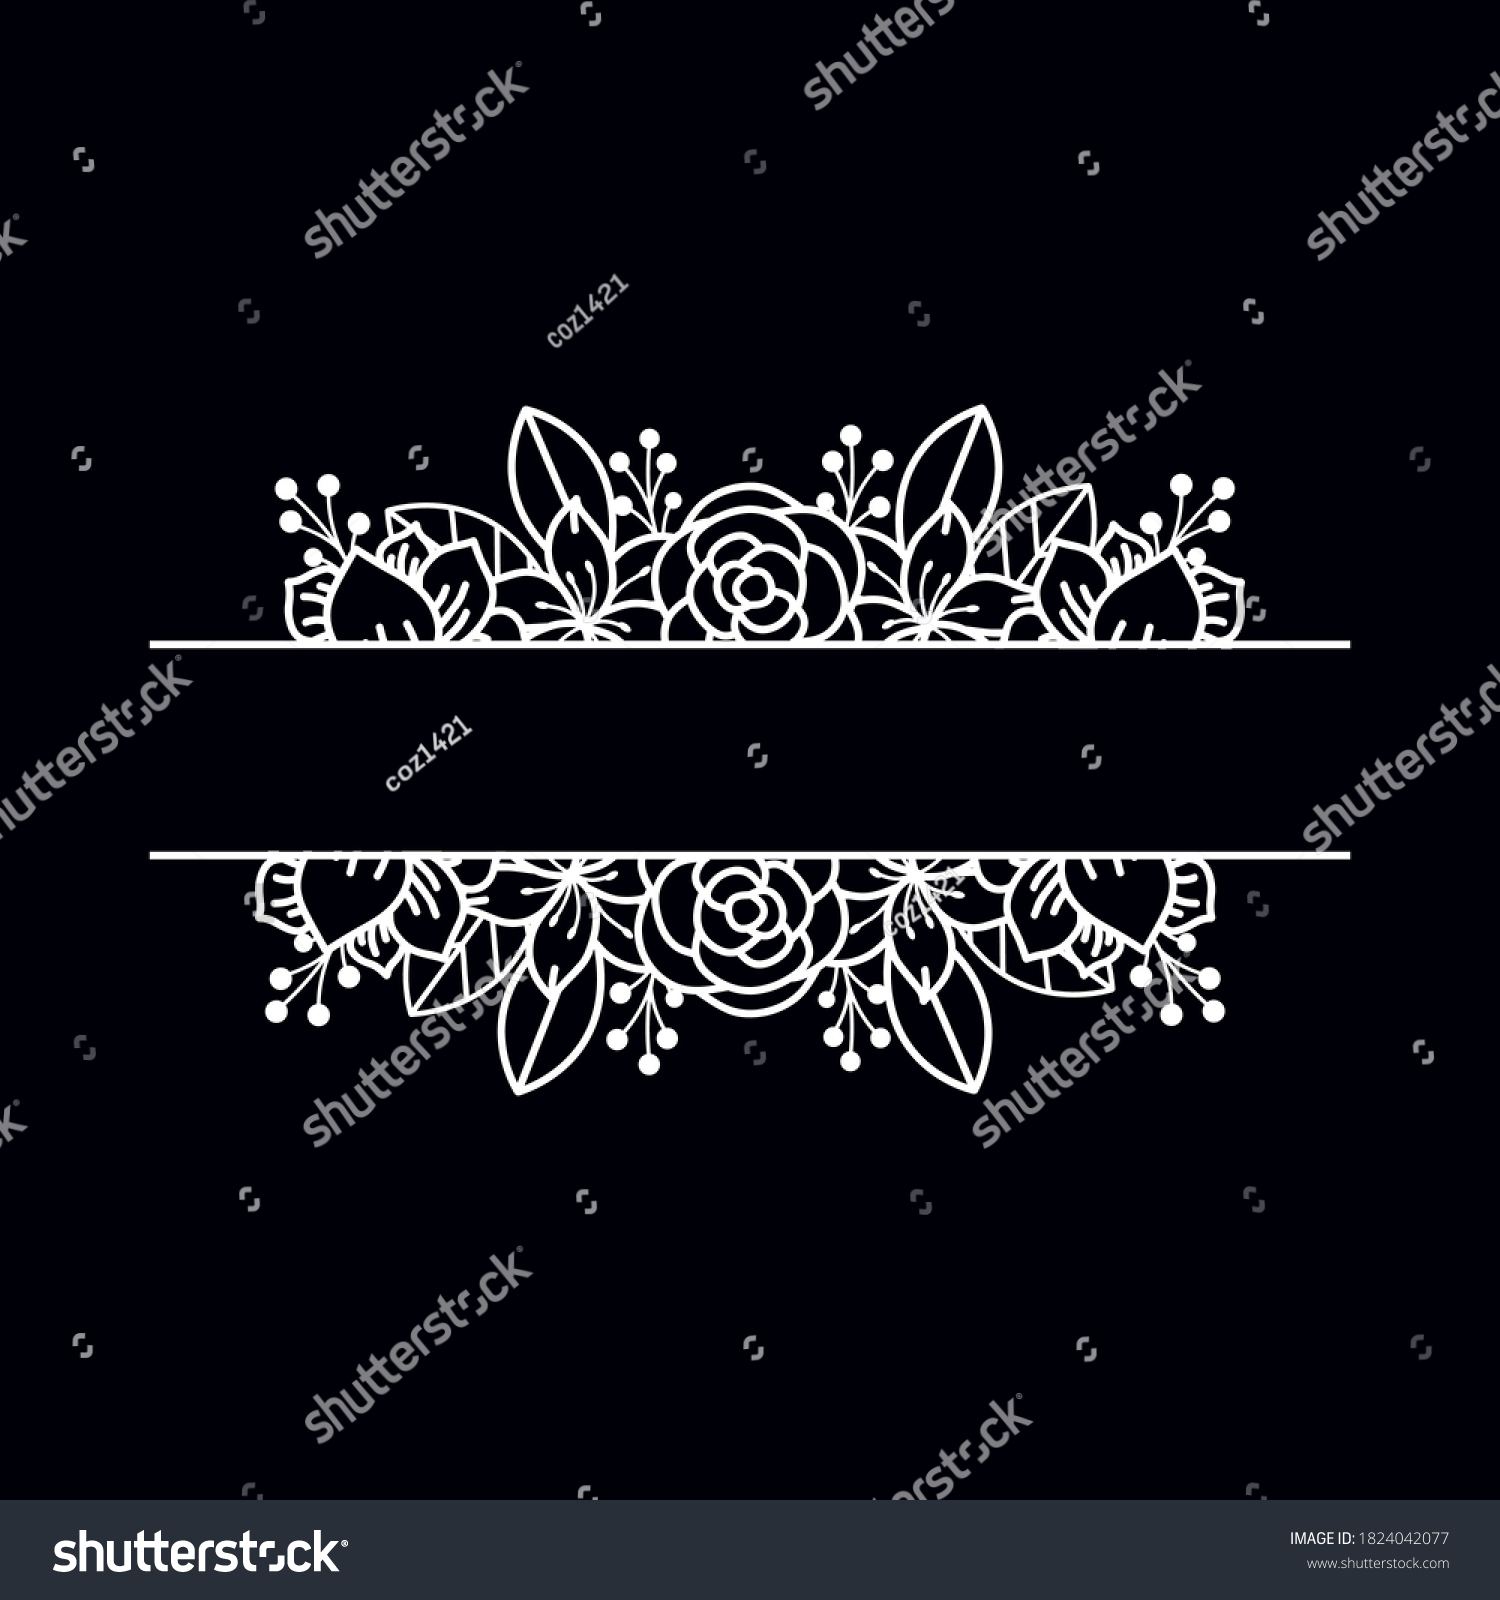 SVG of Floral cut file with space in the midle svg